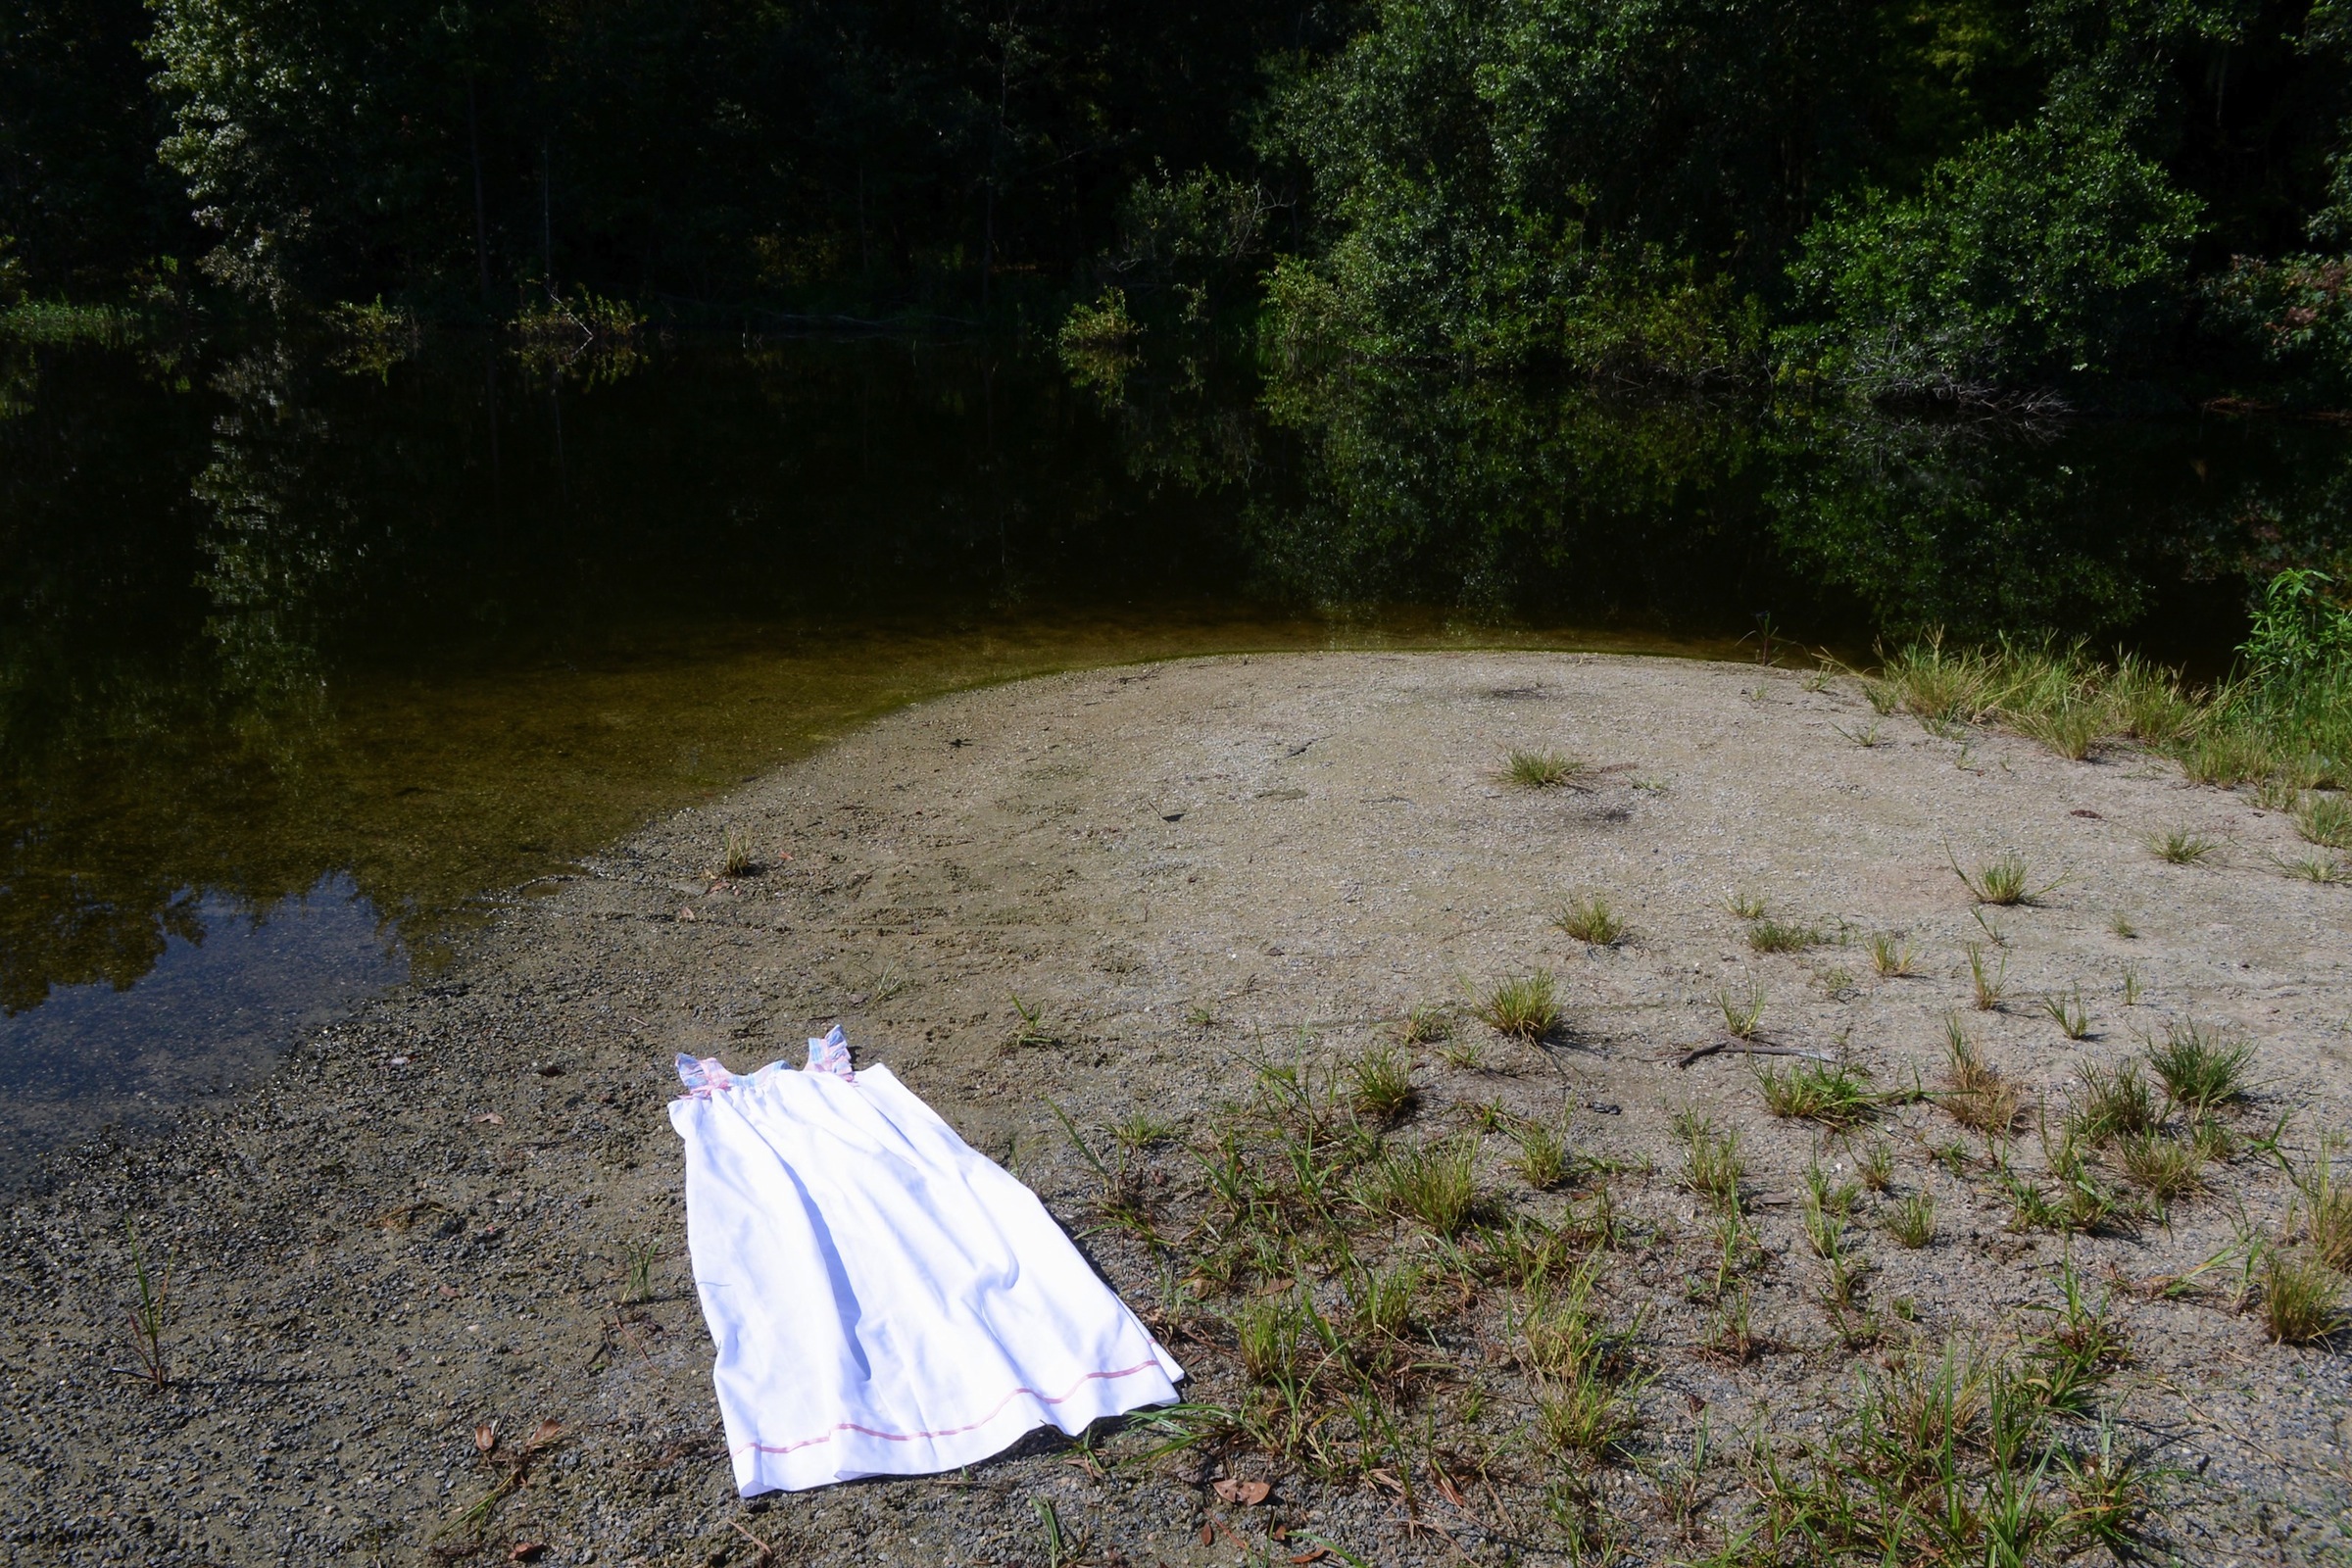 House dress at the bank of a flatwoods lake, 2015